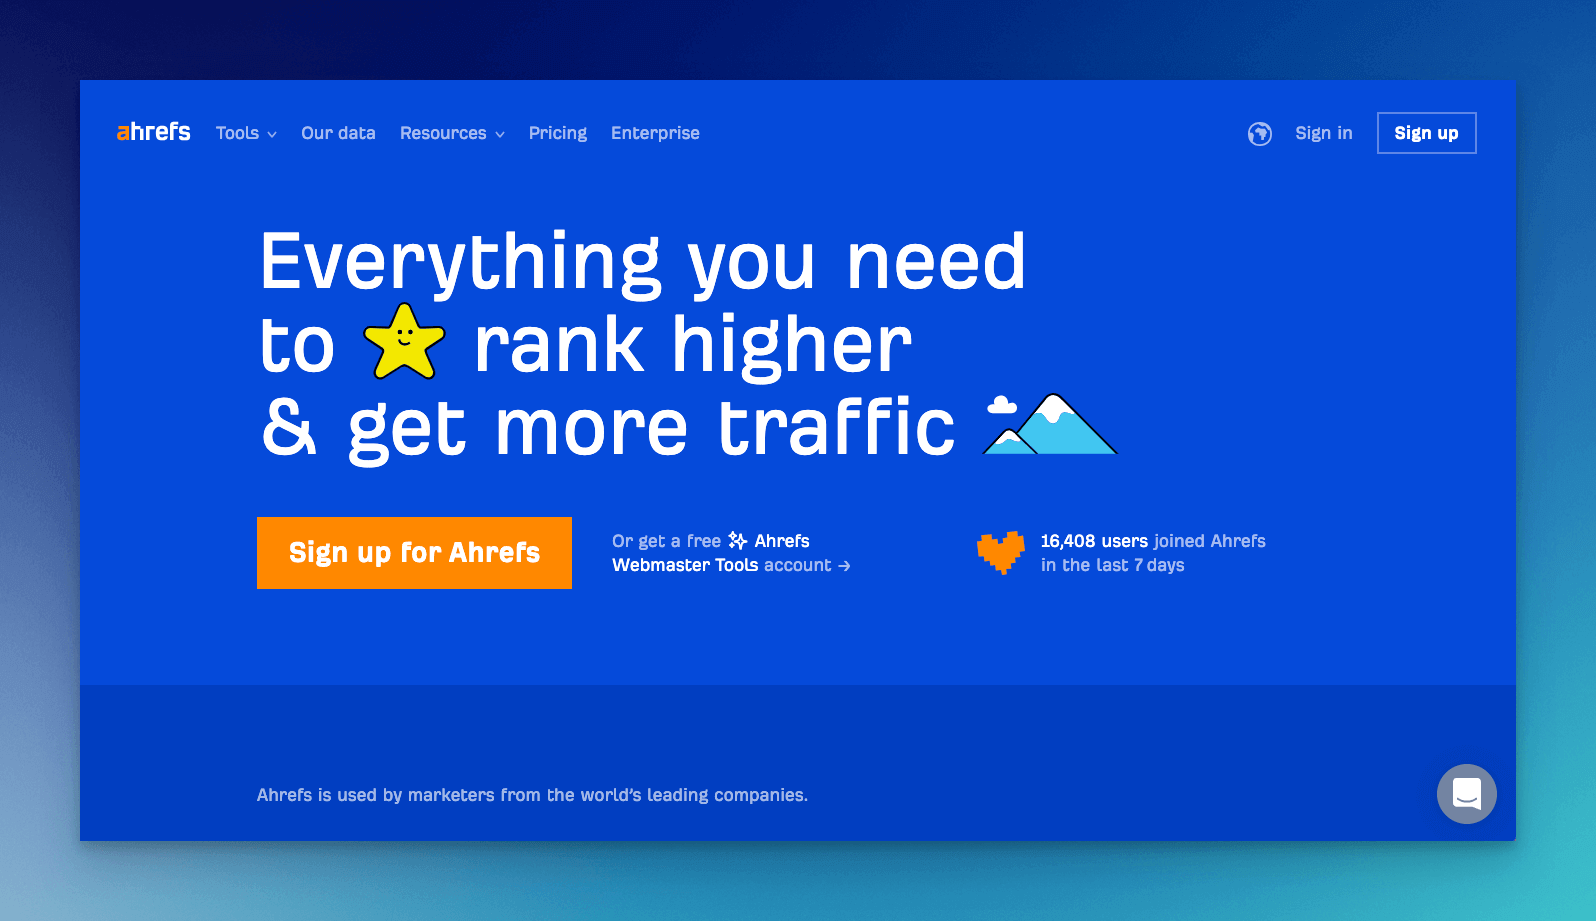 ahrefs seo crawler tool homepage with a blue background and a copy text that says "everything you need to rank higher & get more traffic"